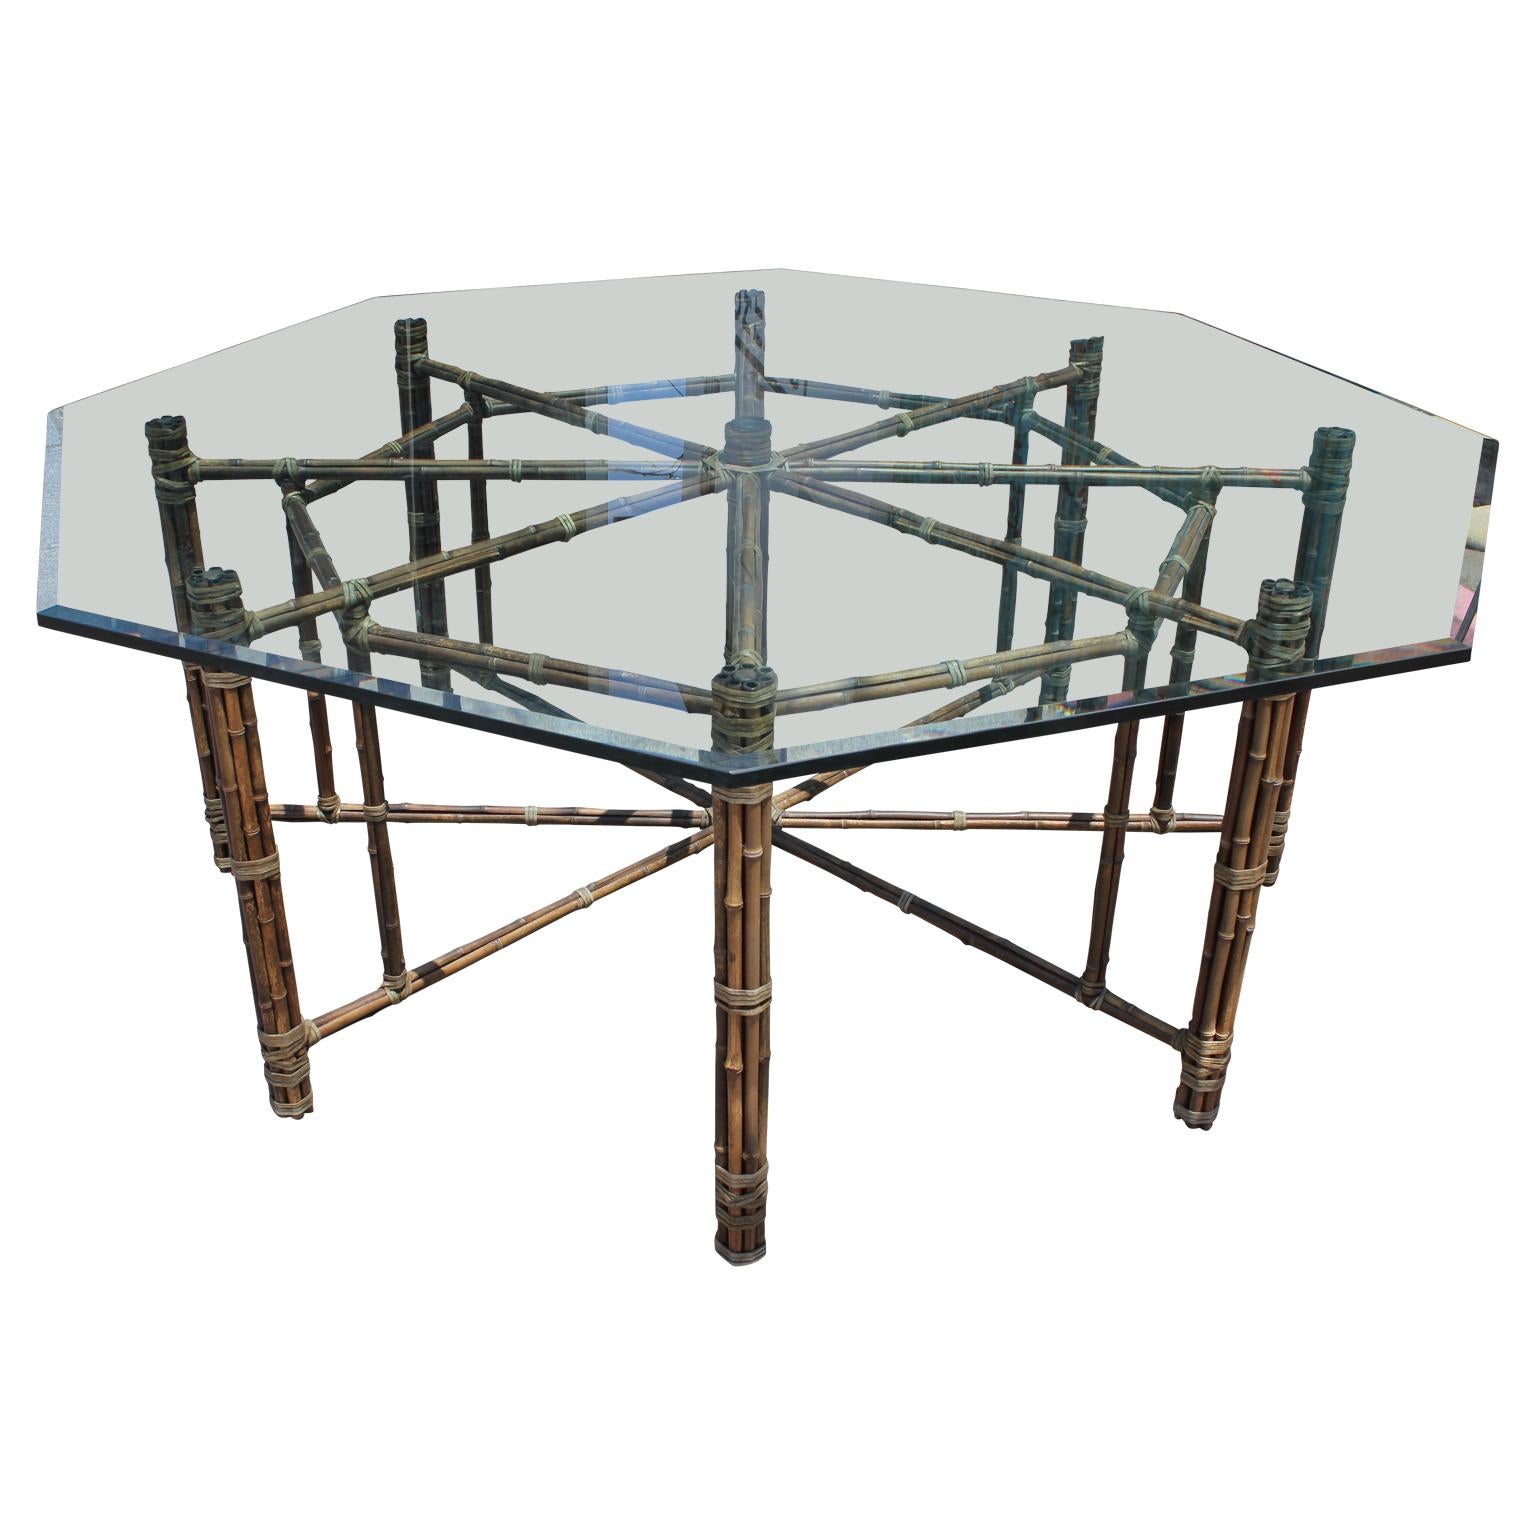 Gorgeous Hollywood Regency style dining table made from bamboo / rattan with an octagonal bevelled glass top by Mcguire and in the style of Mastercraft.